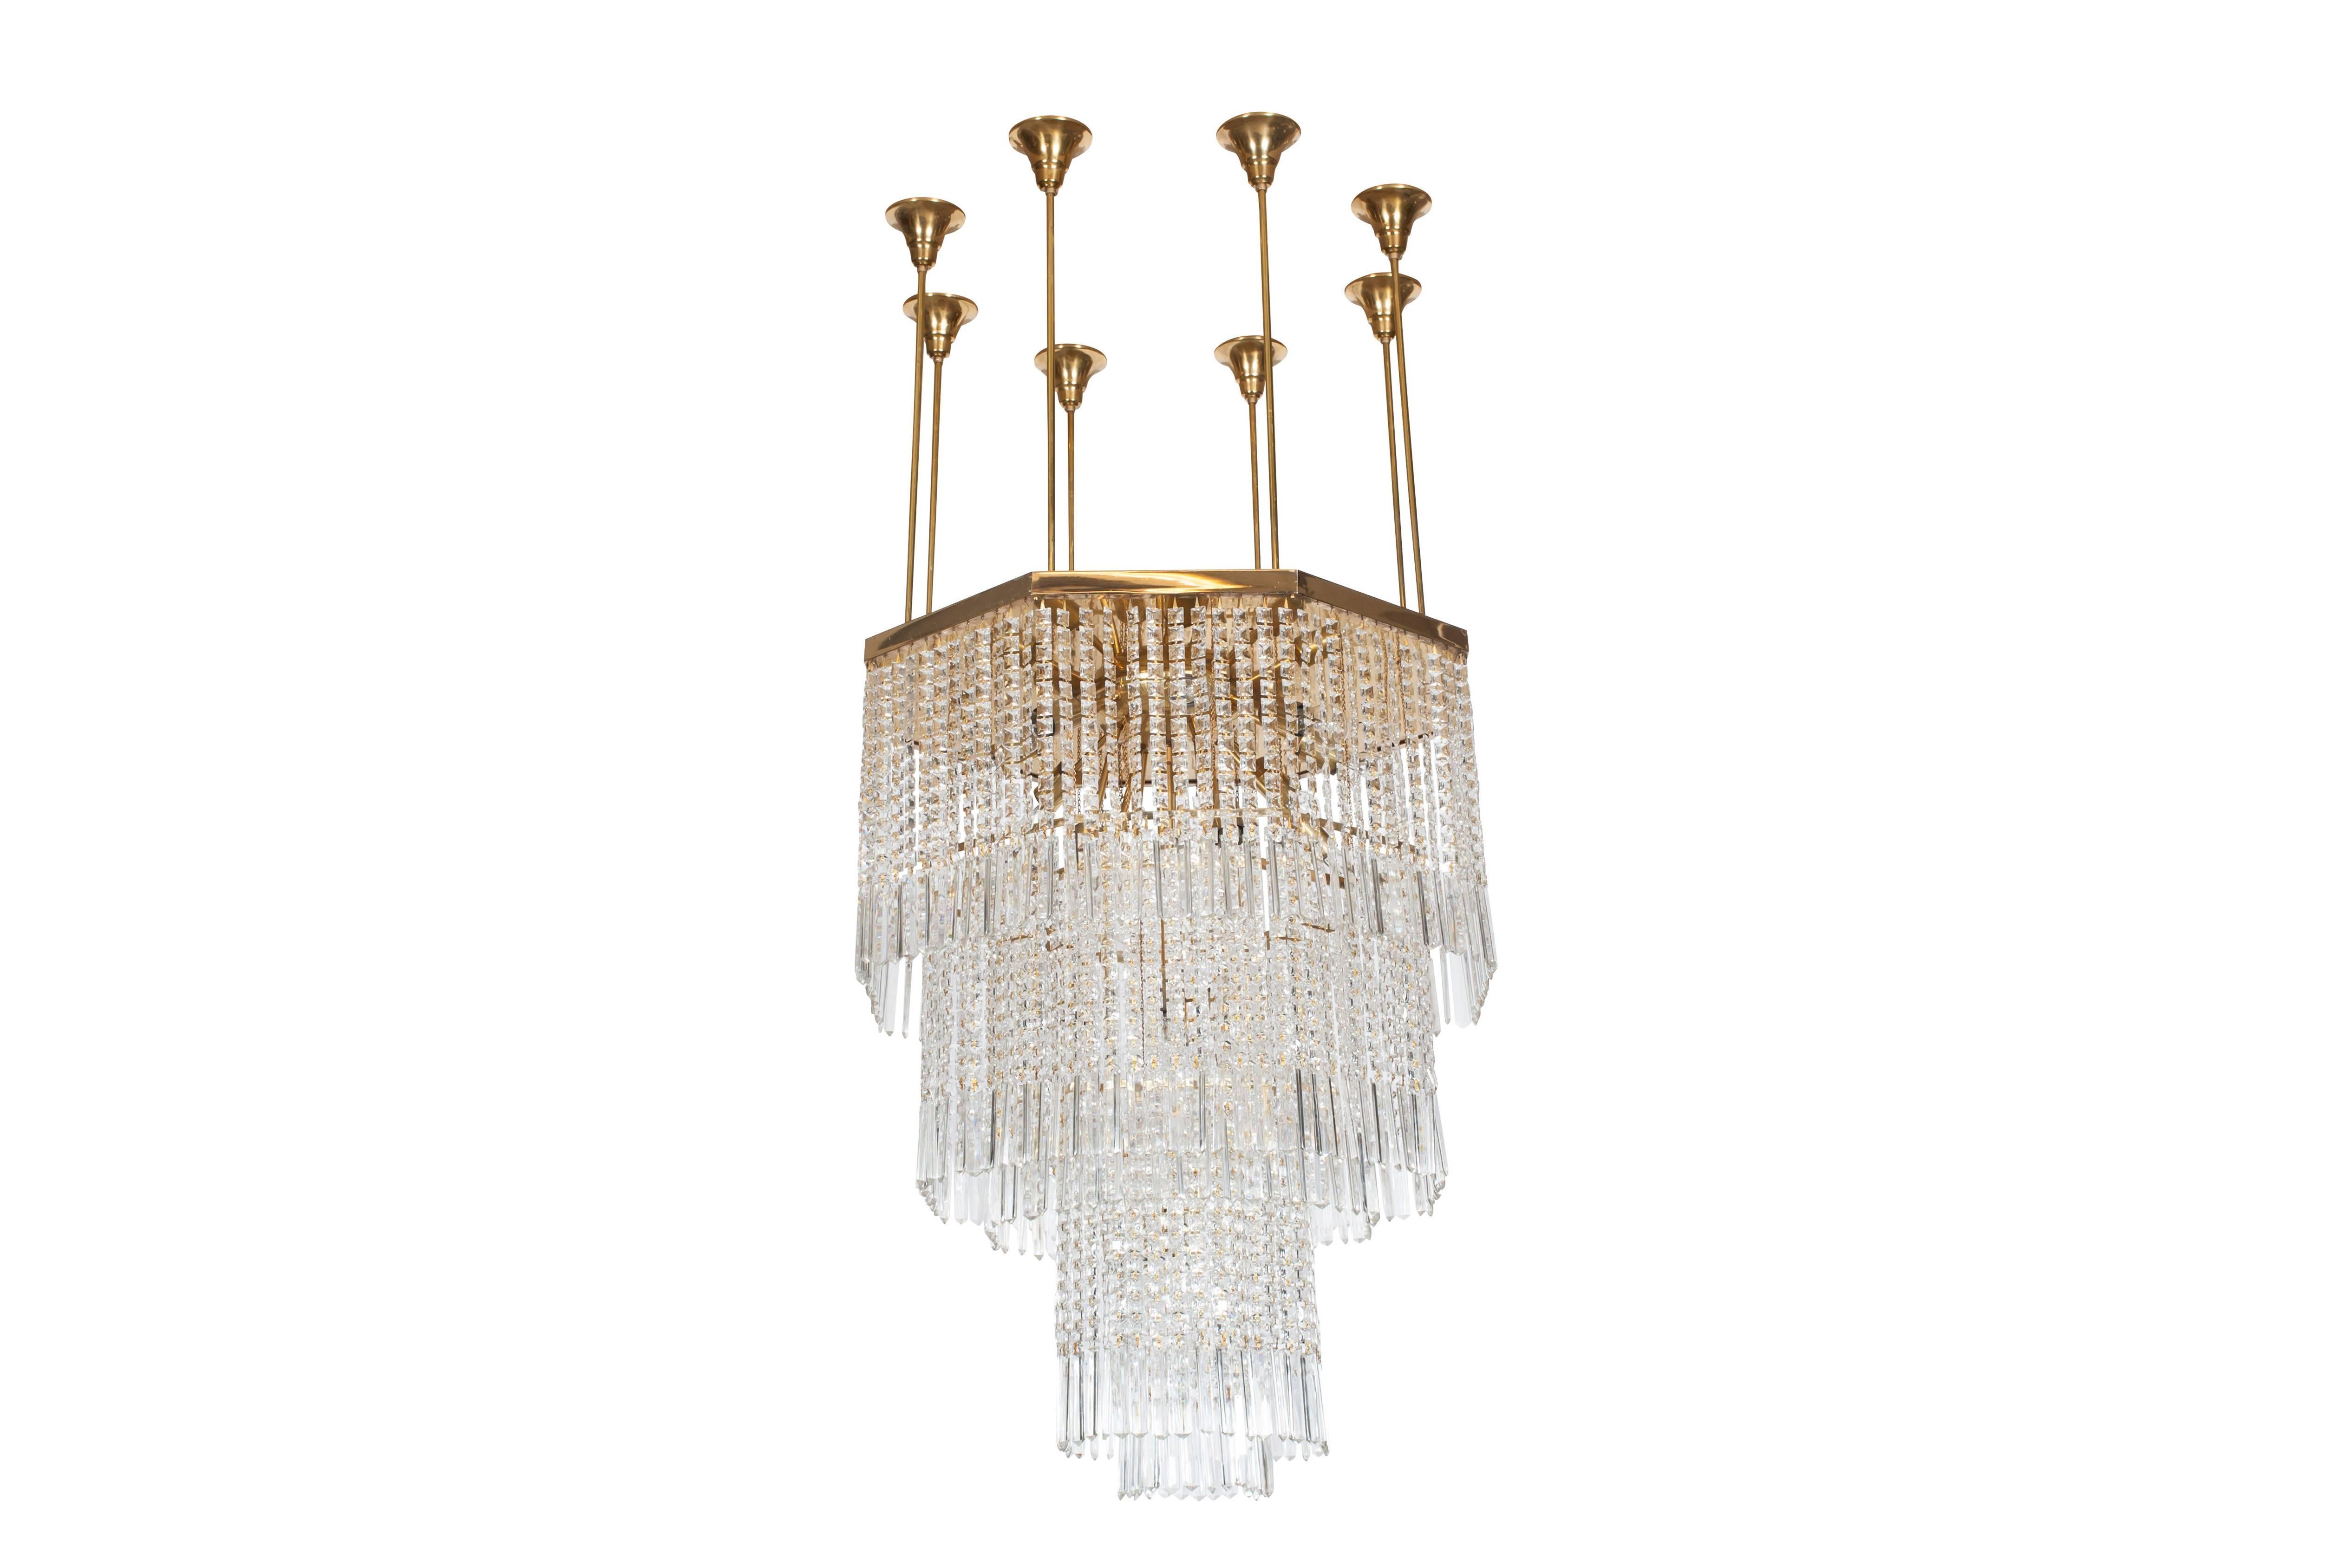 Mid-20th Century Regency Impressive Brass and Glass Chandelier, Italy, 1950s For Sale